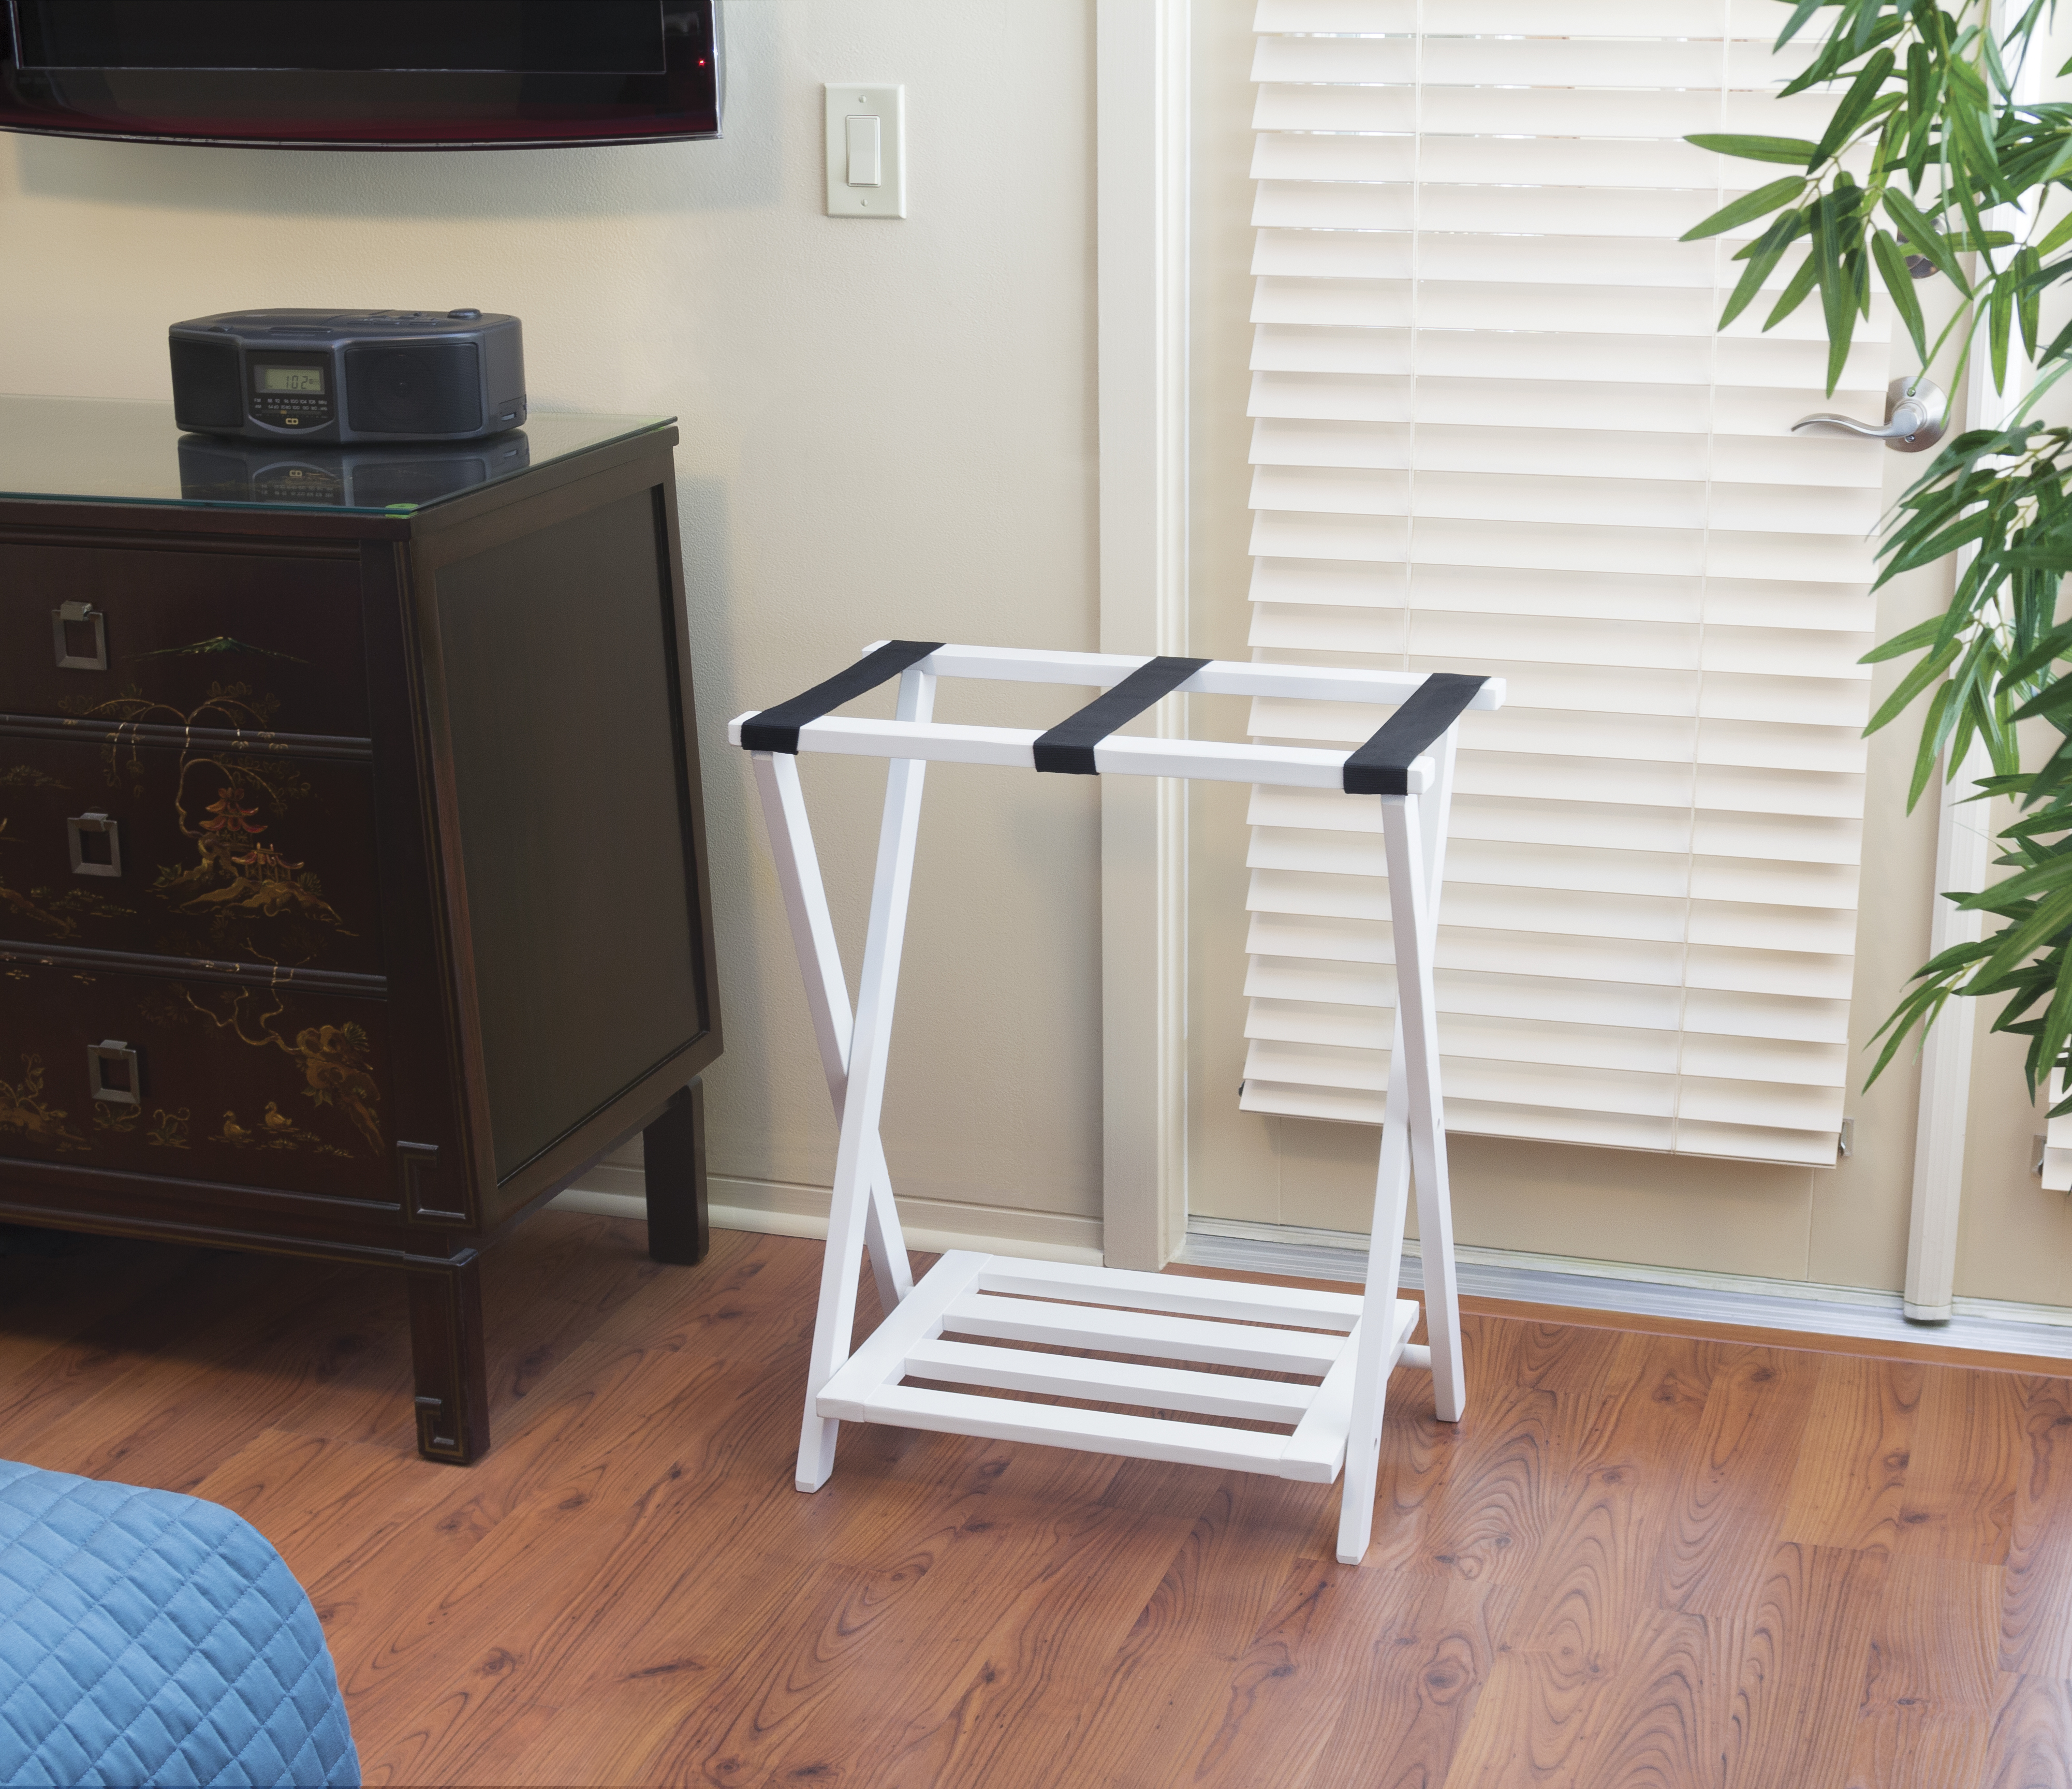 Picture of Lipper International 502W Right Height Luggage Rack with Shoe Rack - White finish